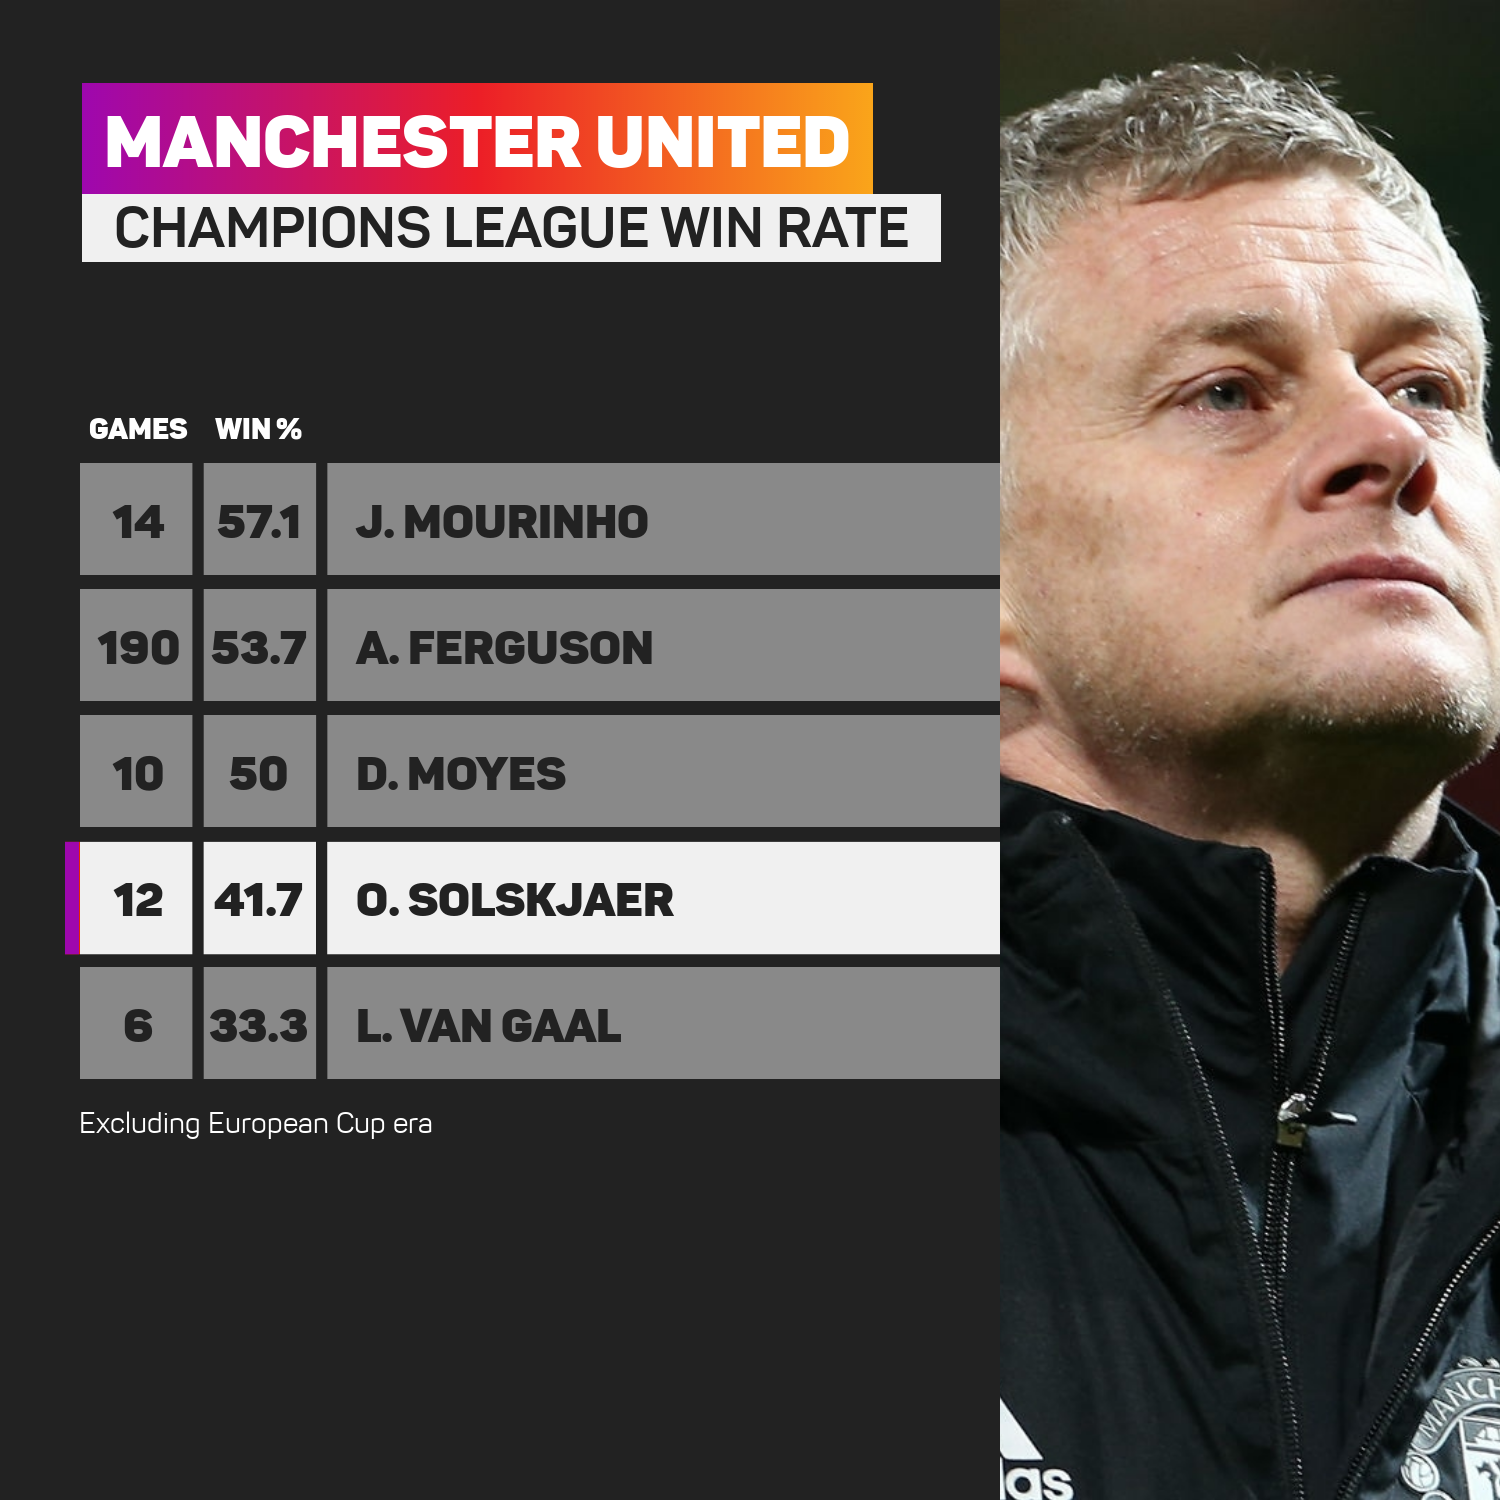 Man Utd managers Champions League win rate